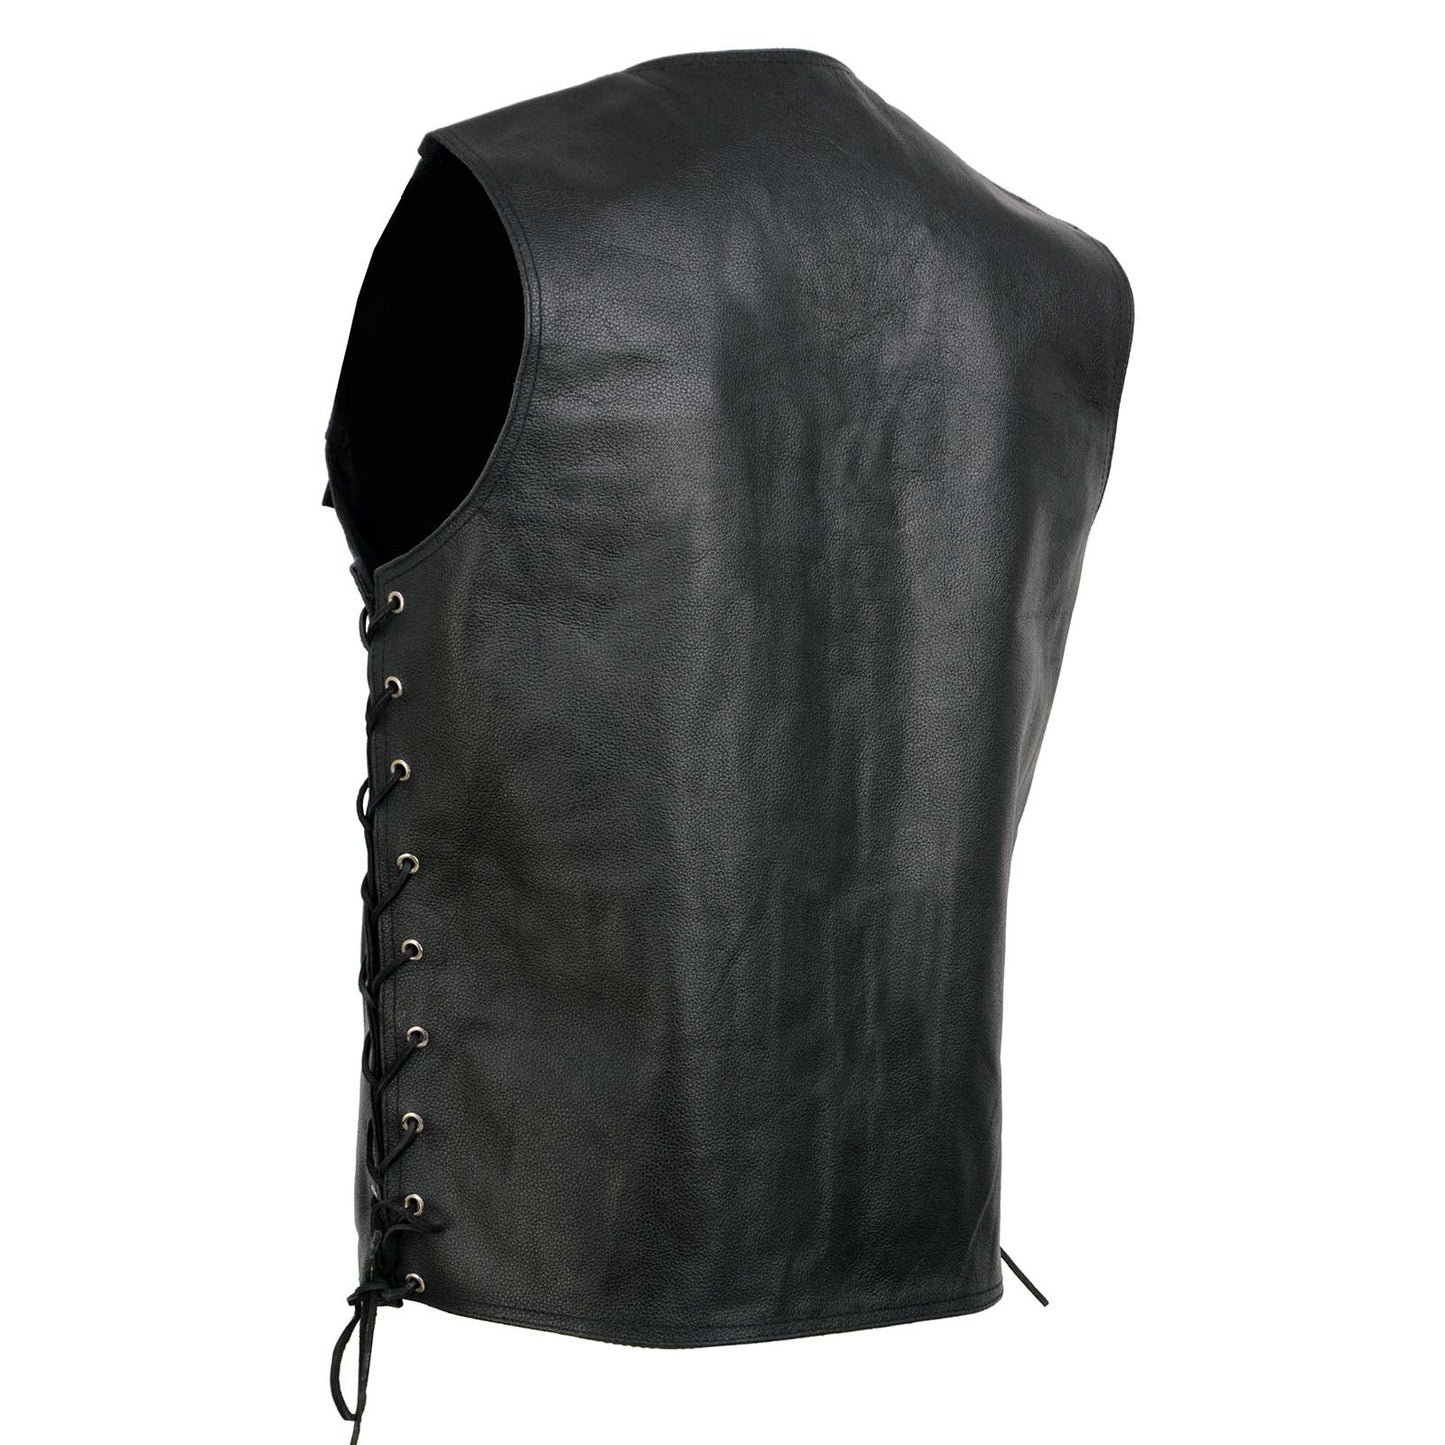 Event Leather EL5360TALL Black Motorcycle Leather Vest Tall Sizes with Denim Style Pockets -Riding Club Adult Vests